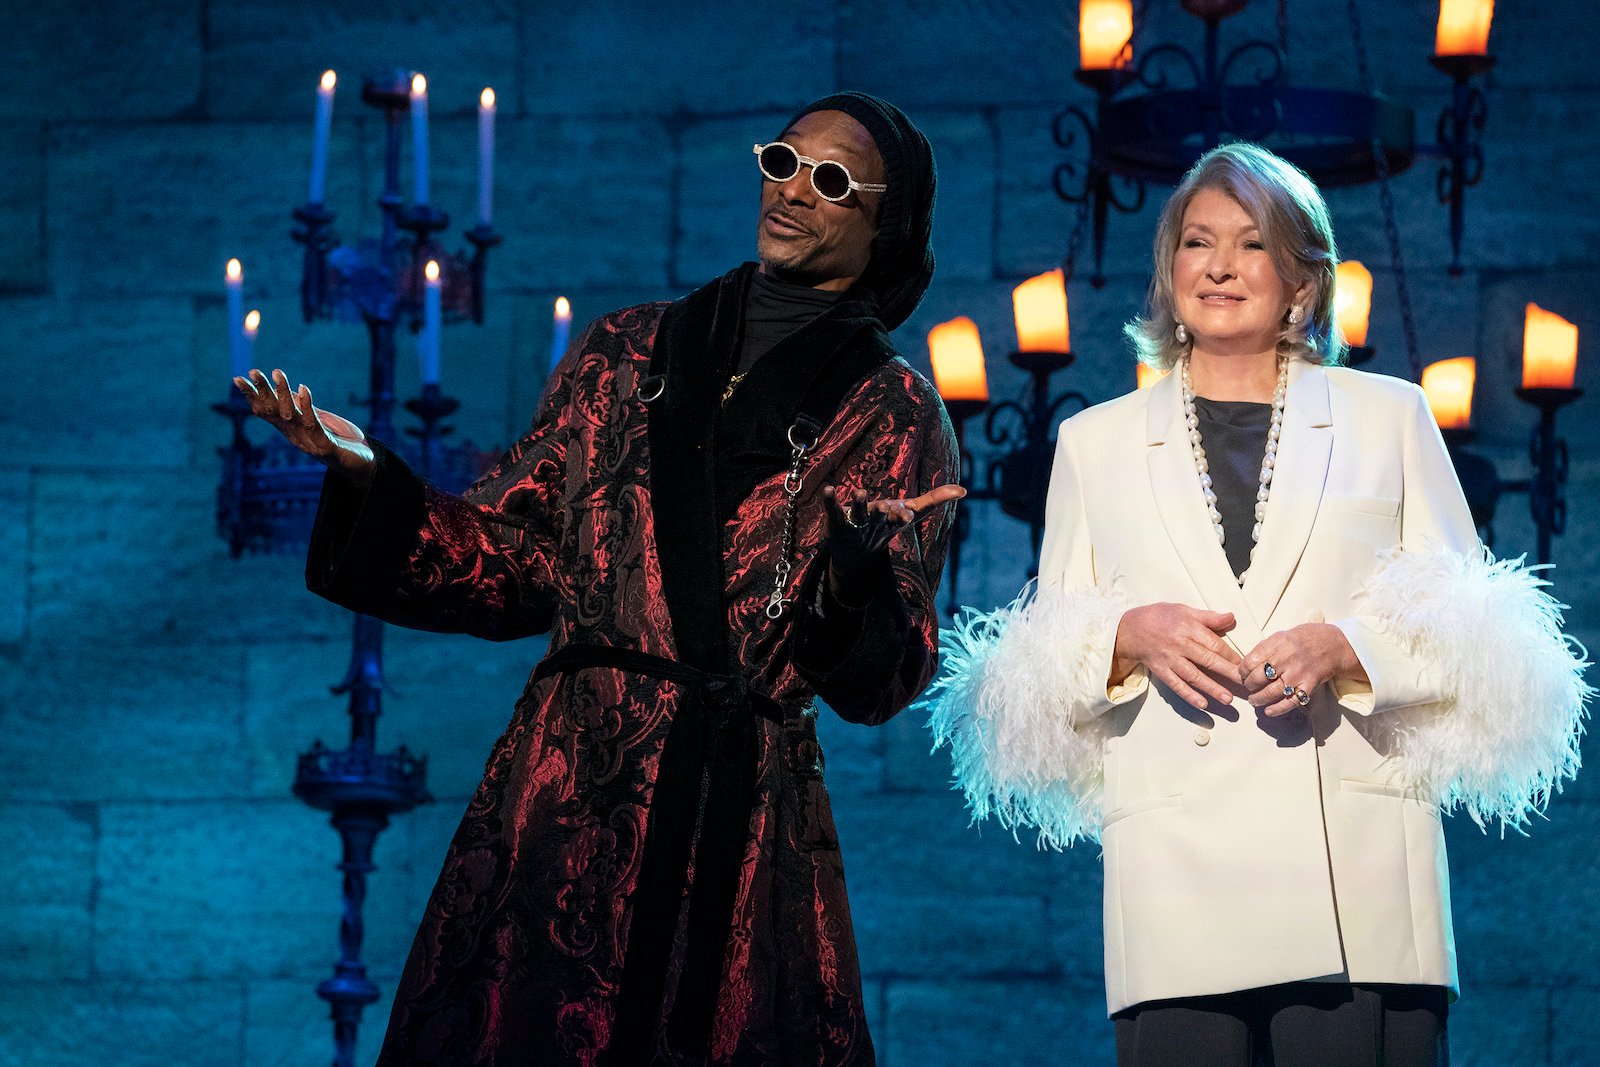 Martha Stewart and Snoop Dogg Throw an Epic Halloween Party That Has